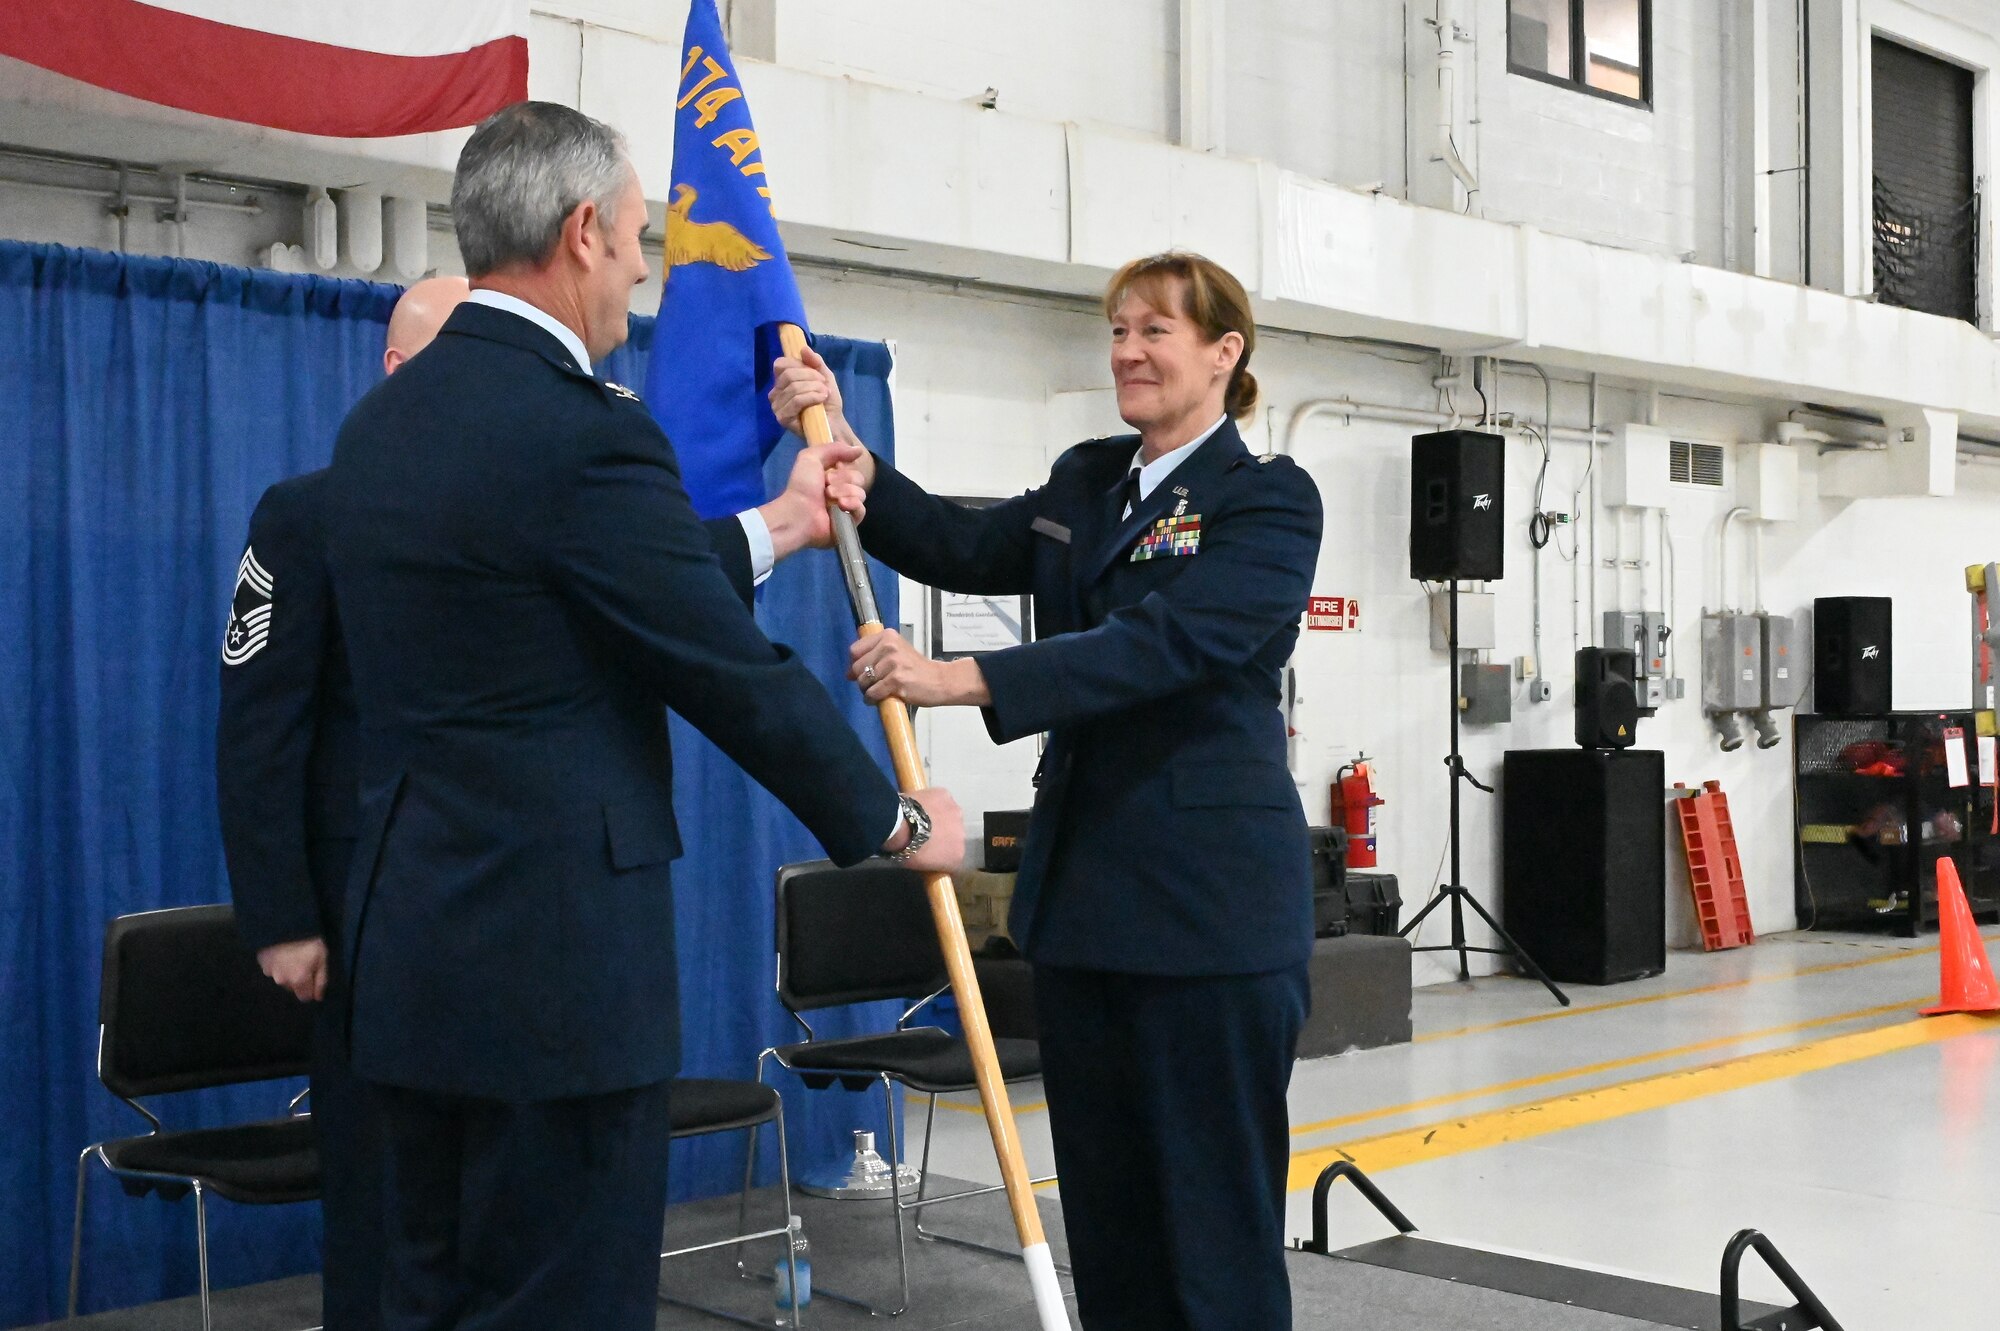 Col. William J. McCrink III (left), 174th Attack Wing commander, passes the 174th Medical Group (MDG) guidon to Lt. Col. Misty Looney during an assumption of command ceremony at Hancock Field Air National Guard Base, Dec. 3, 2022.  (U.S. Air National Guard photo by Staff Sgt. Duane Morgan)